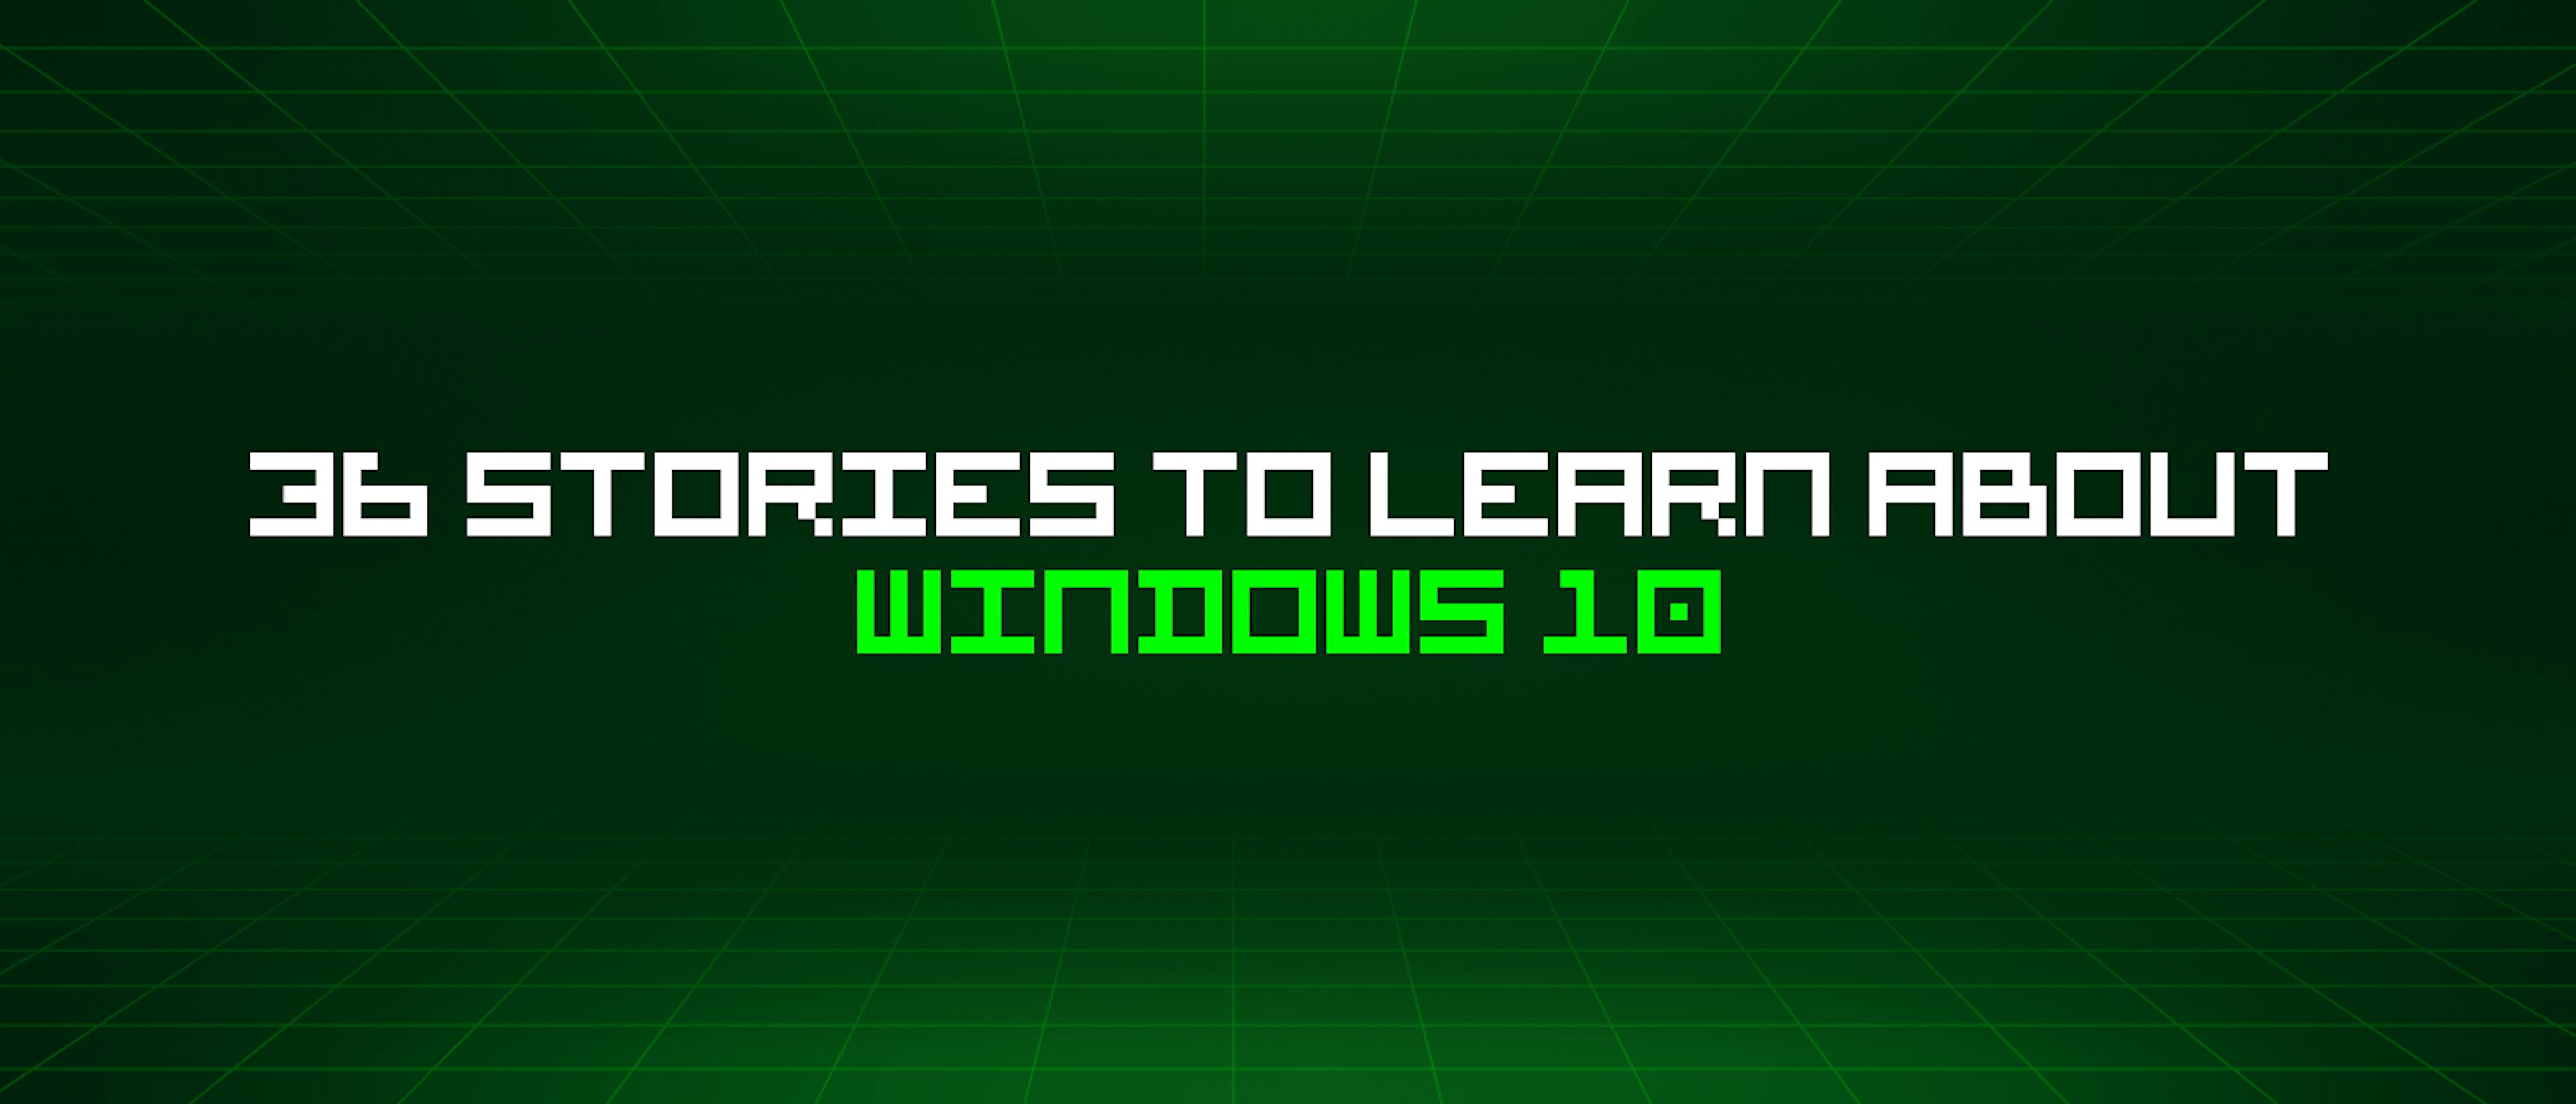 featured image - 36 Stories To Learn About Windows 10